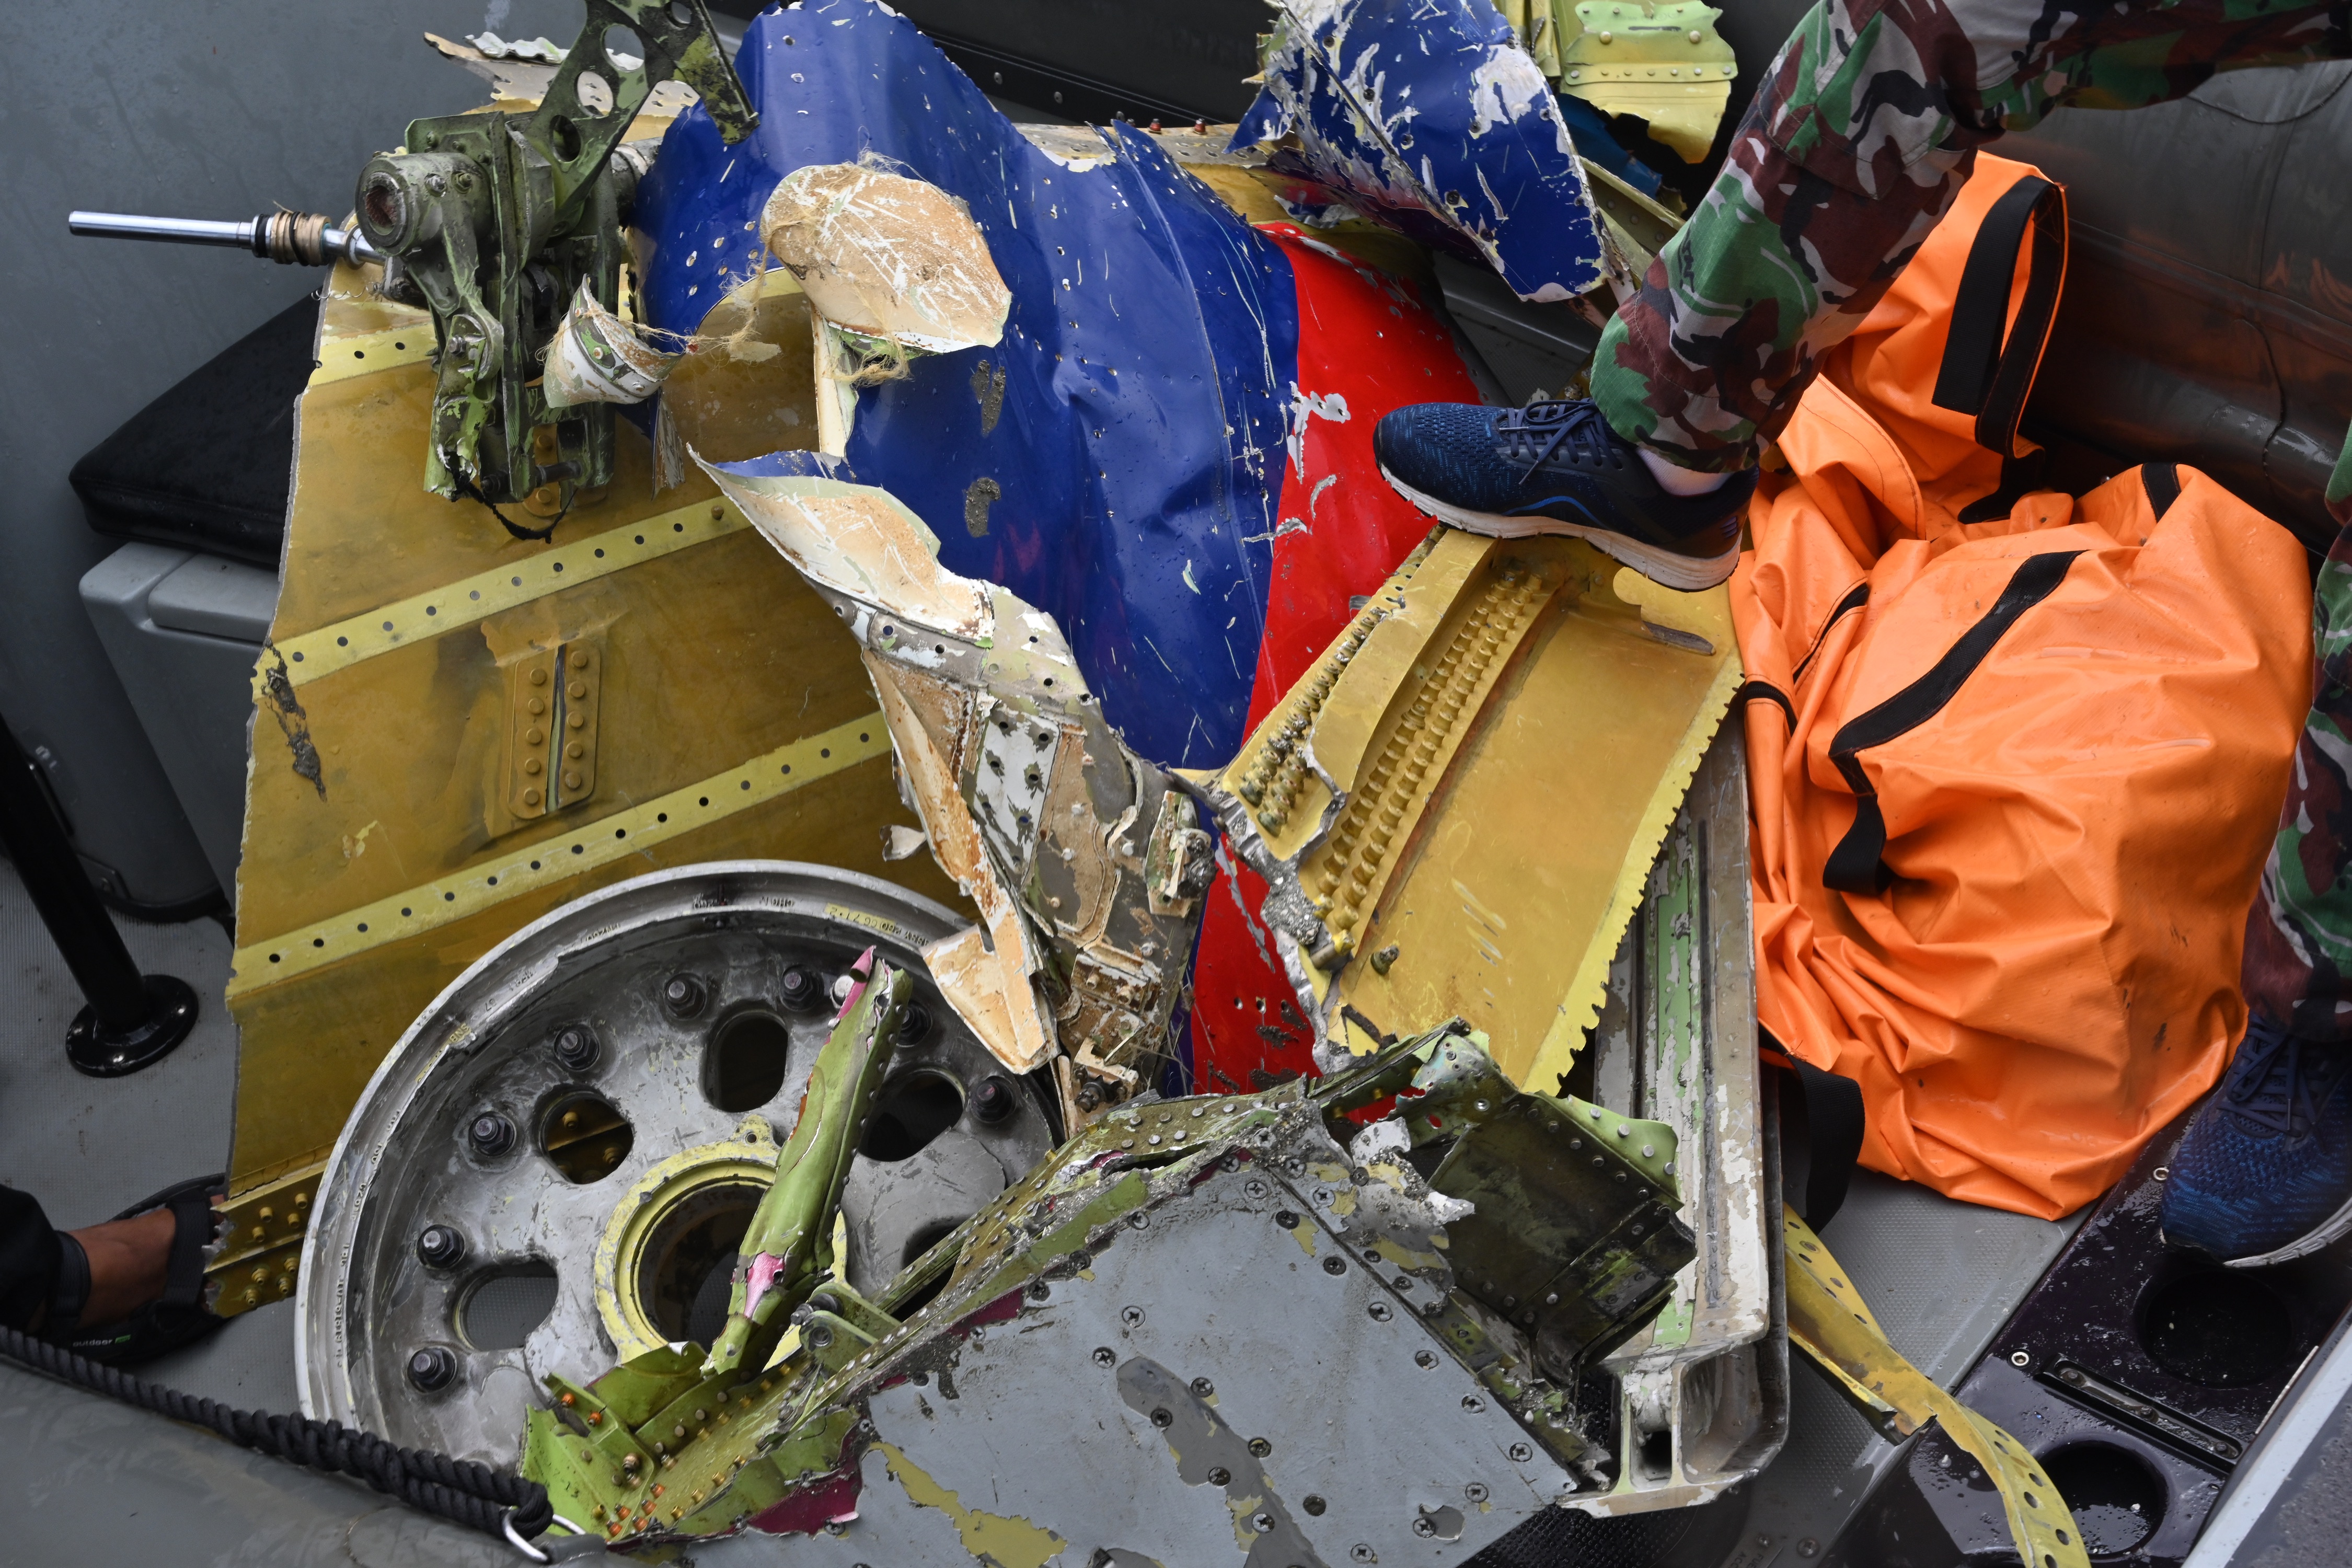 Retrieved wreckage from the ill-fated Sriwijaya Air Boeing 737-500 aircraft. (AFP PHOTO BY ADEK BERRY)